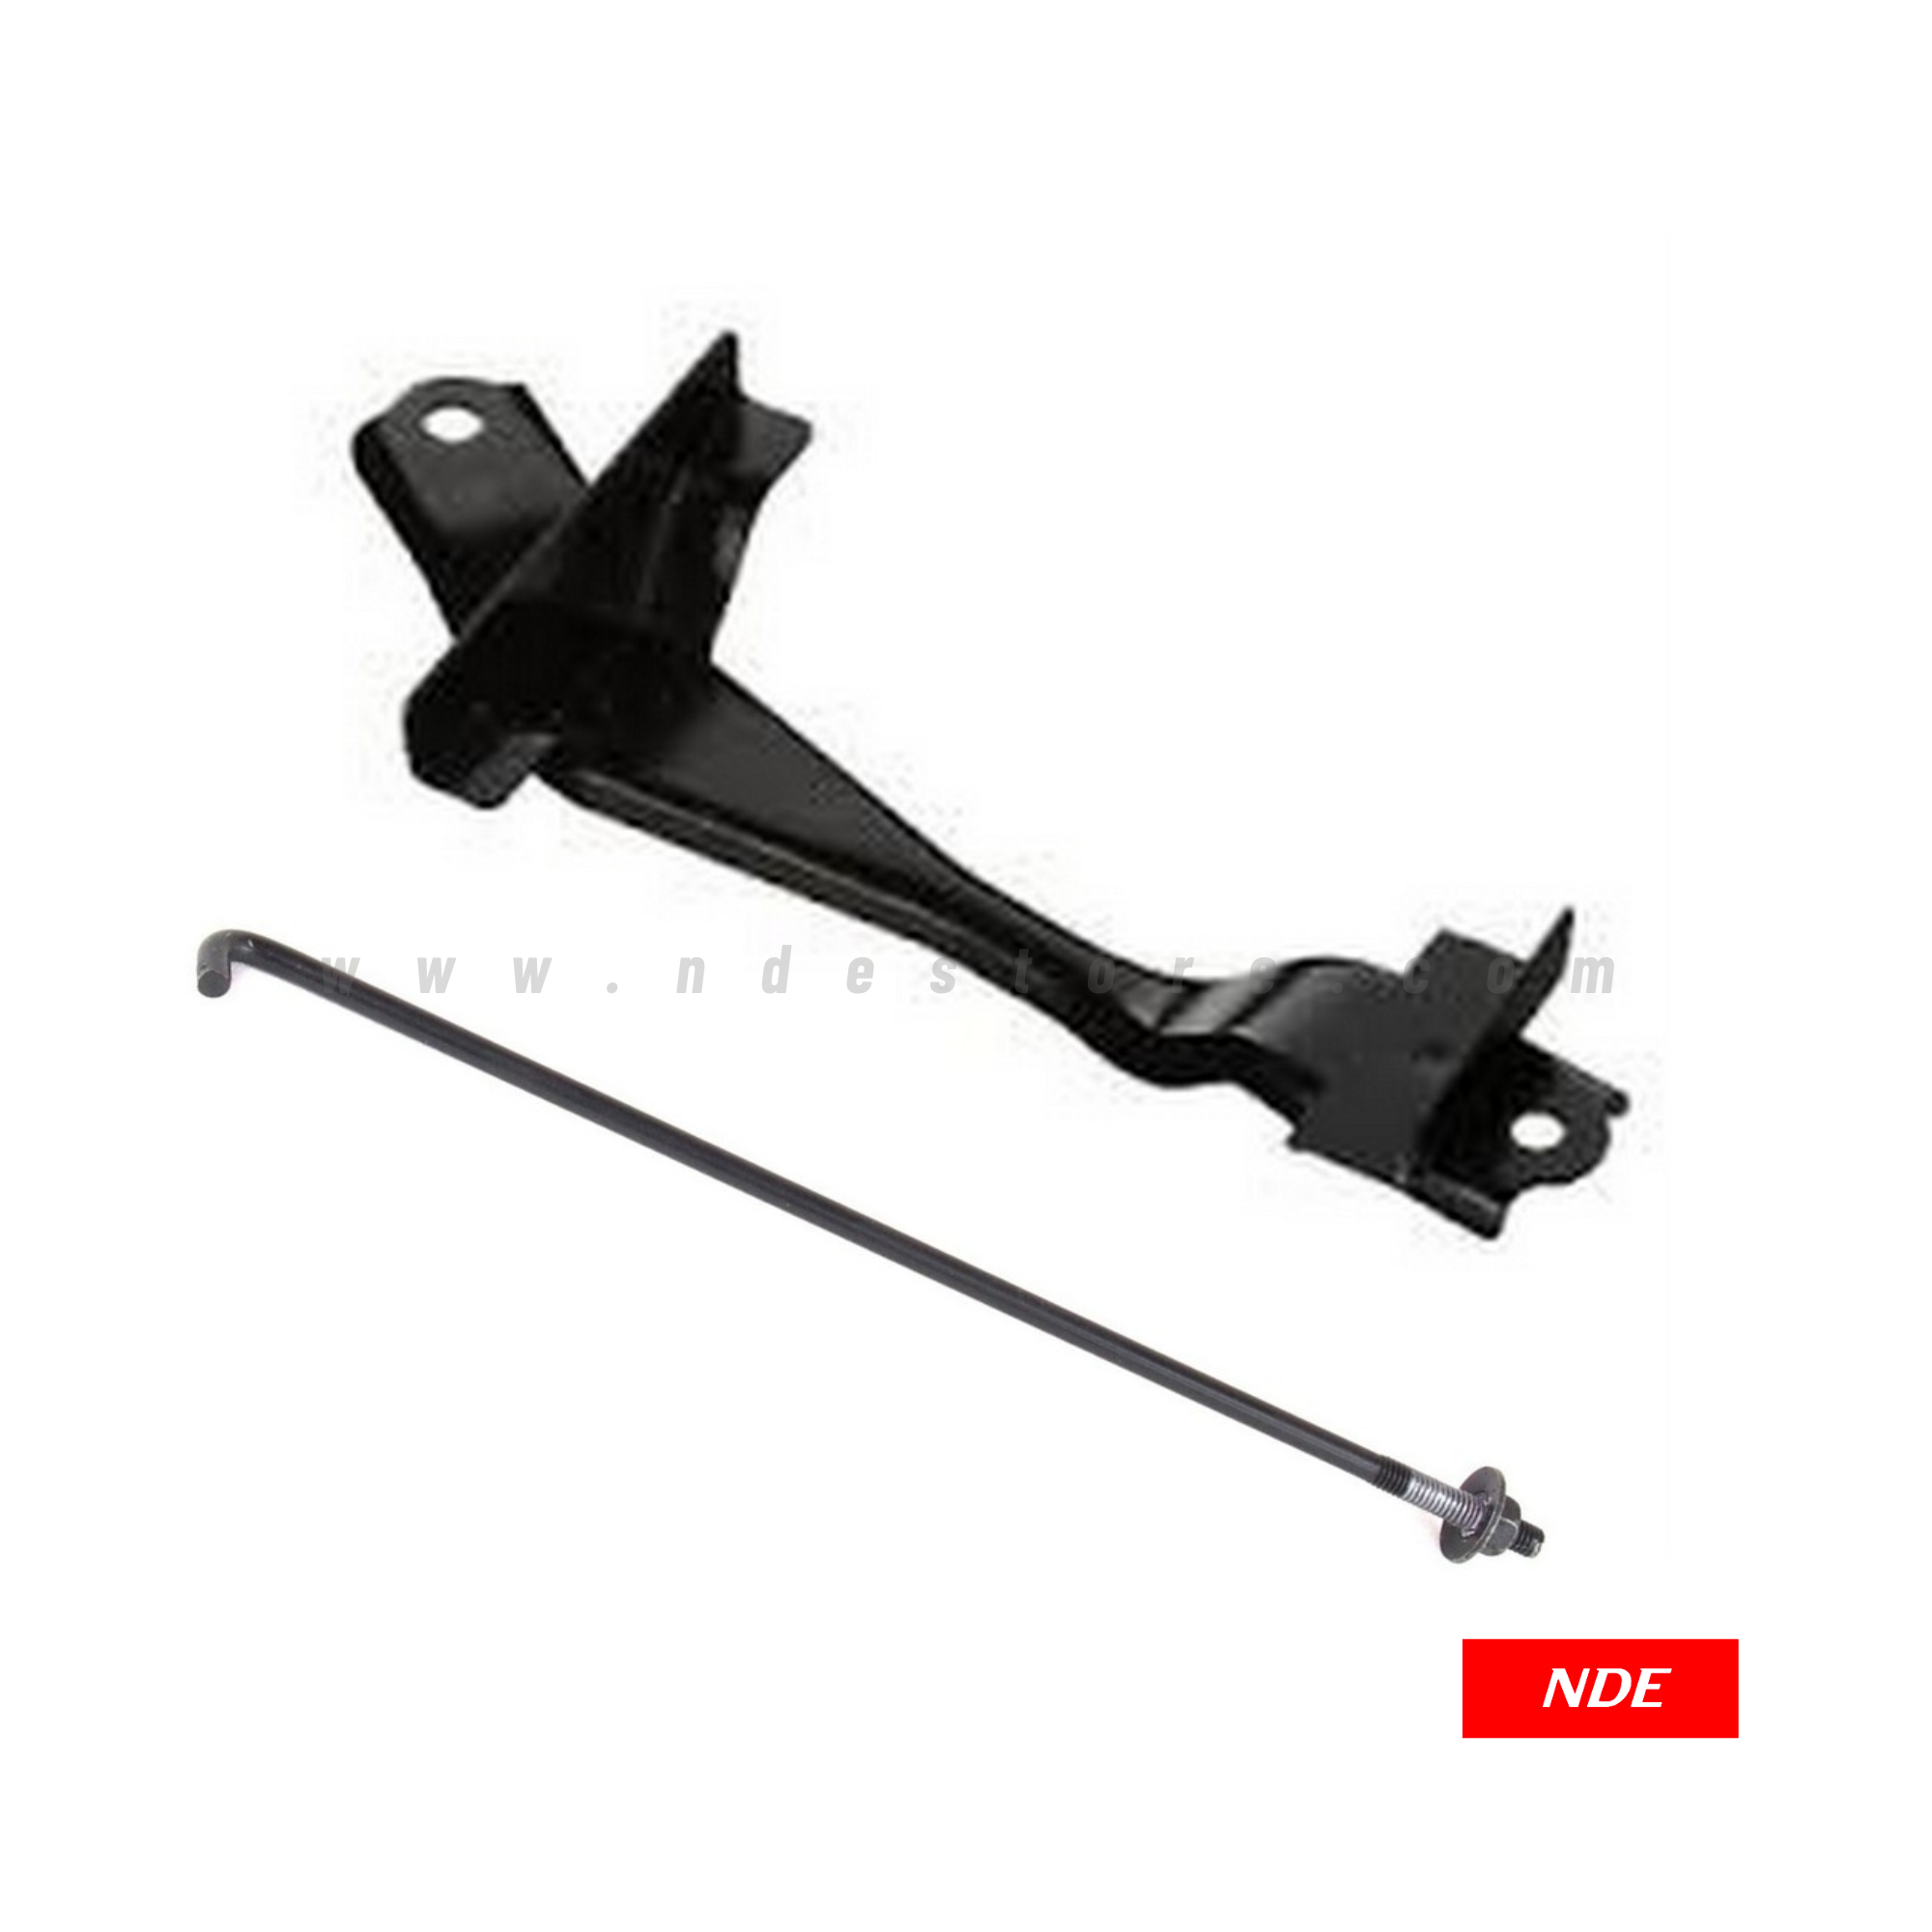 BATTERY CLAMP / BATTERY CLIP FOR TOYOTA YARIS